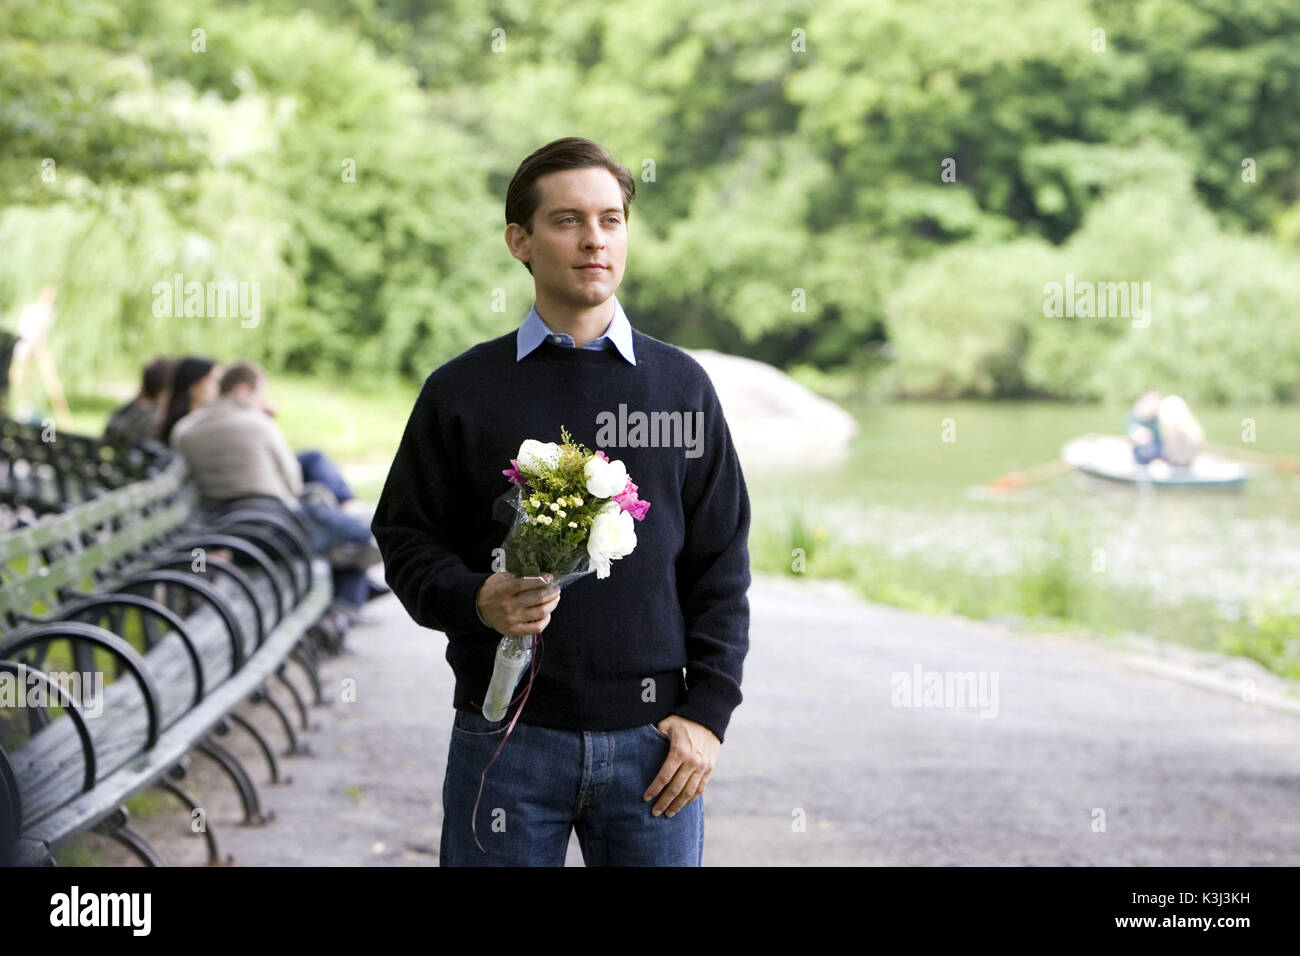 Tobey Maguire come Peter Parker SPIDER-MAN 3 Tobey Maguire come Peter Parker / Spider-man data: 2007 Foto Stock